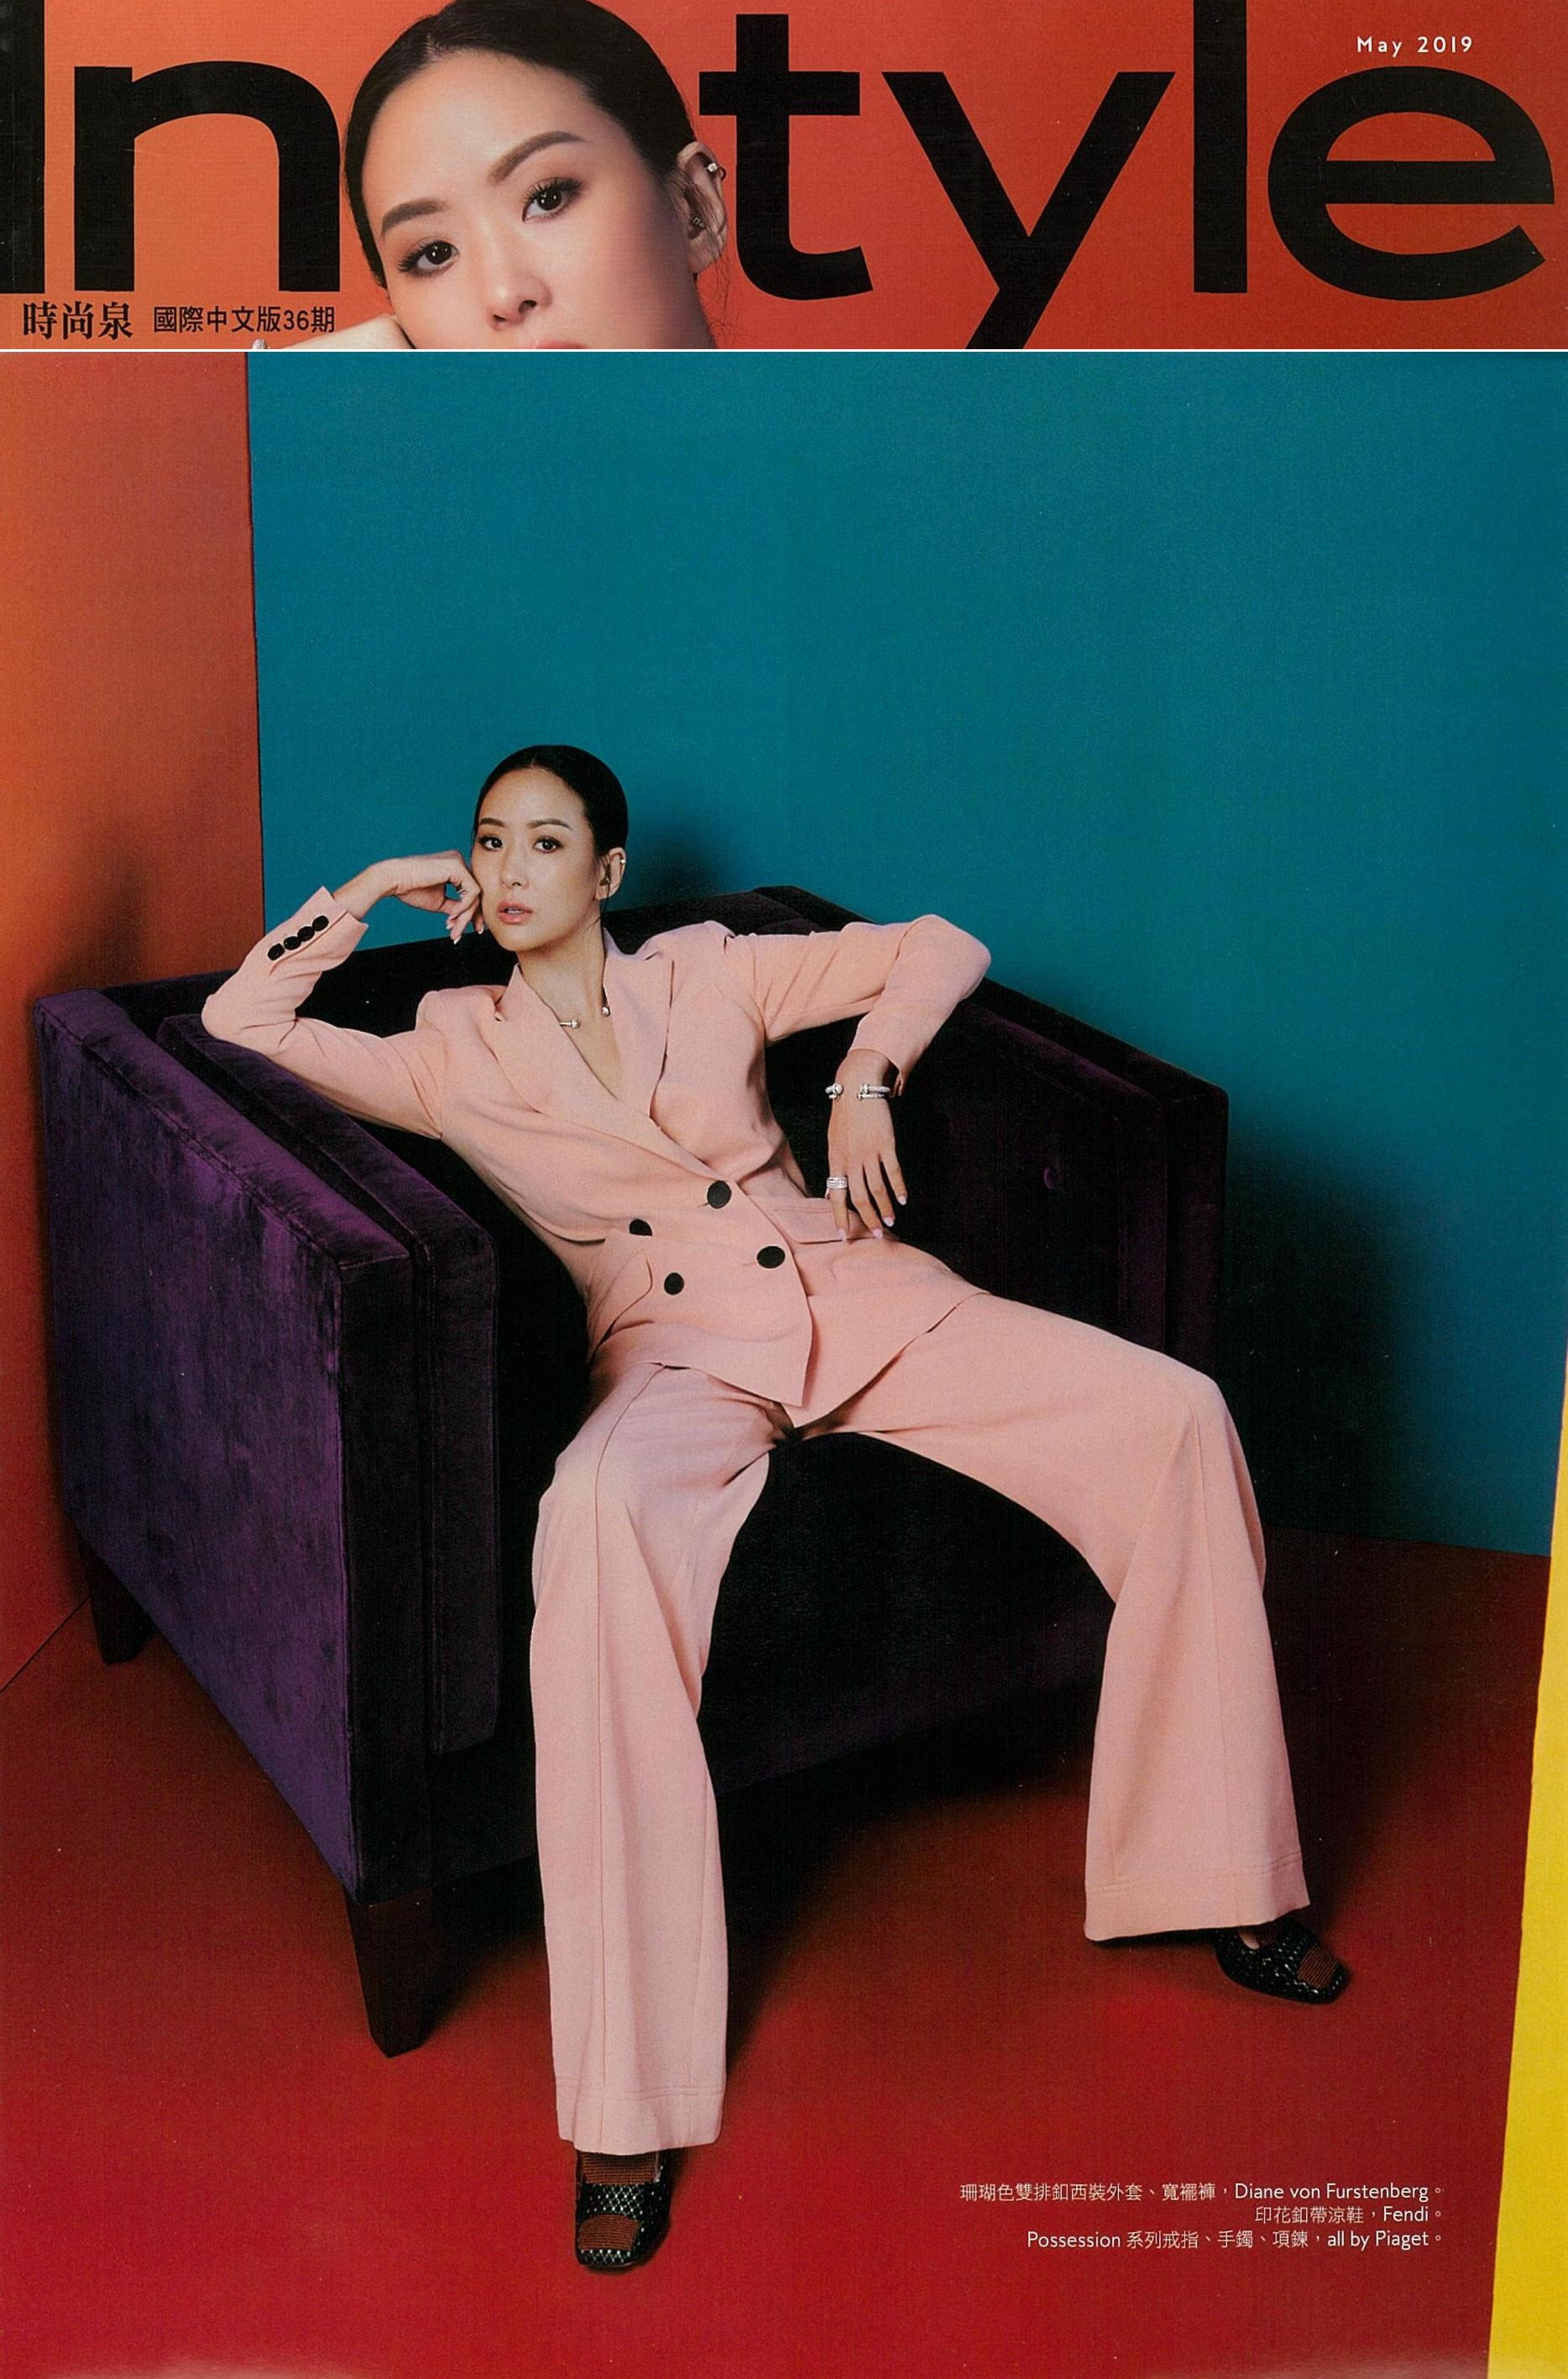 Taiwan_Instyle_May 2019_DVF(2).jpg